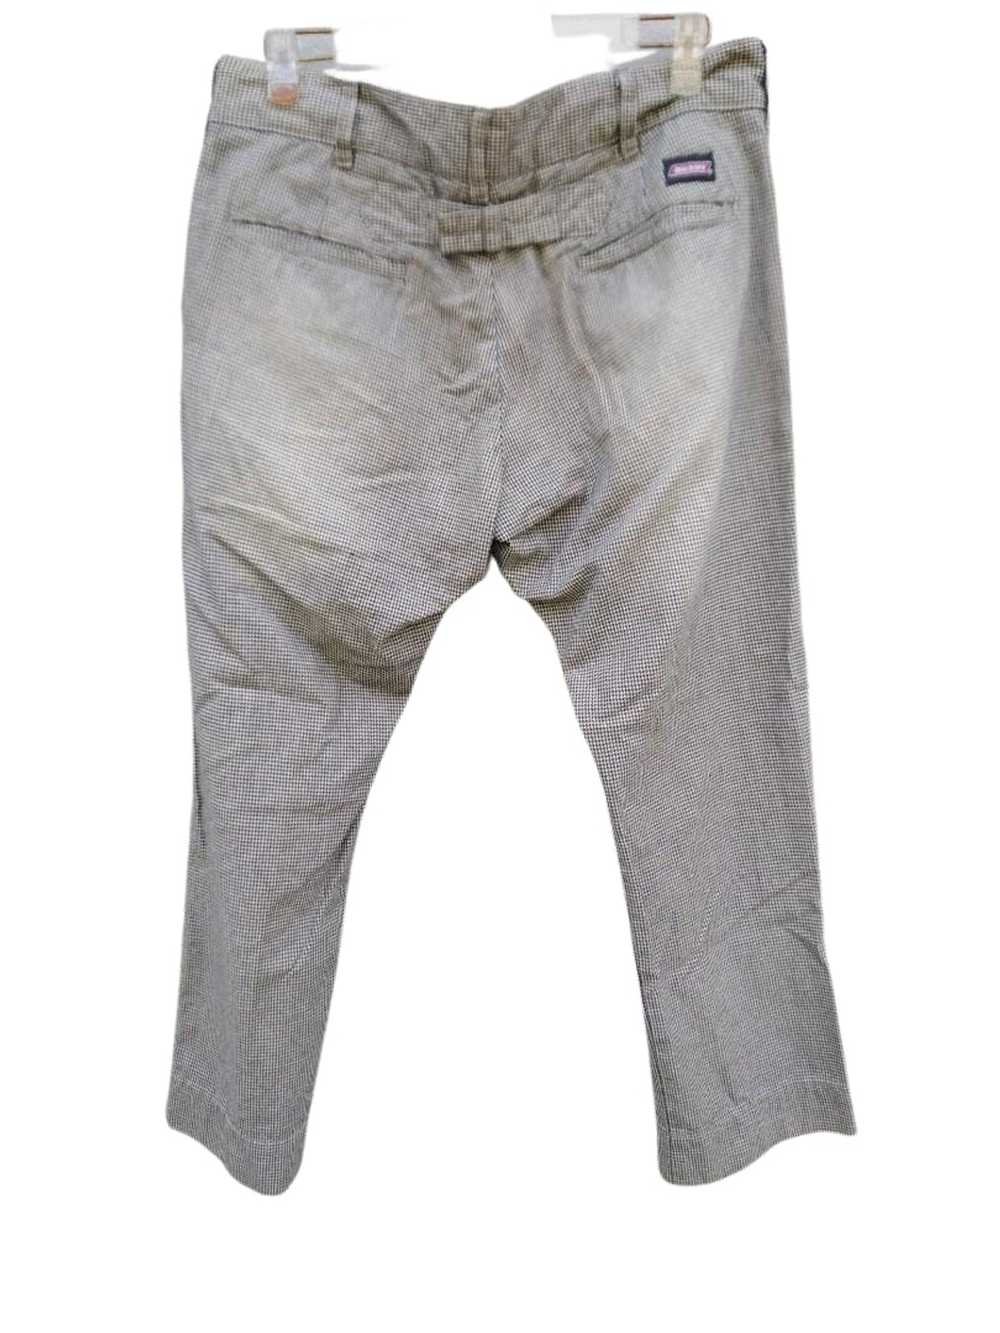 Dickies Dickies Checkered Pants Slim Fit with Buc… - image 2